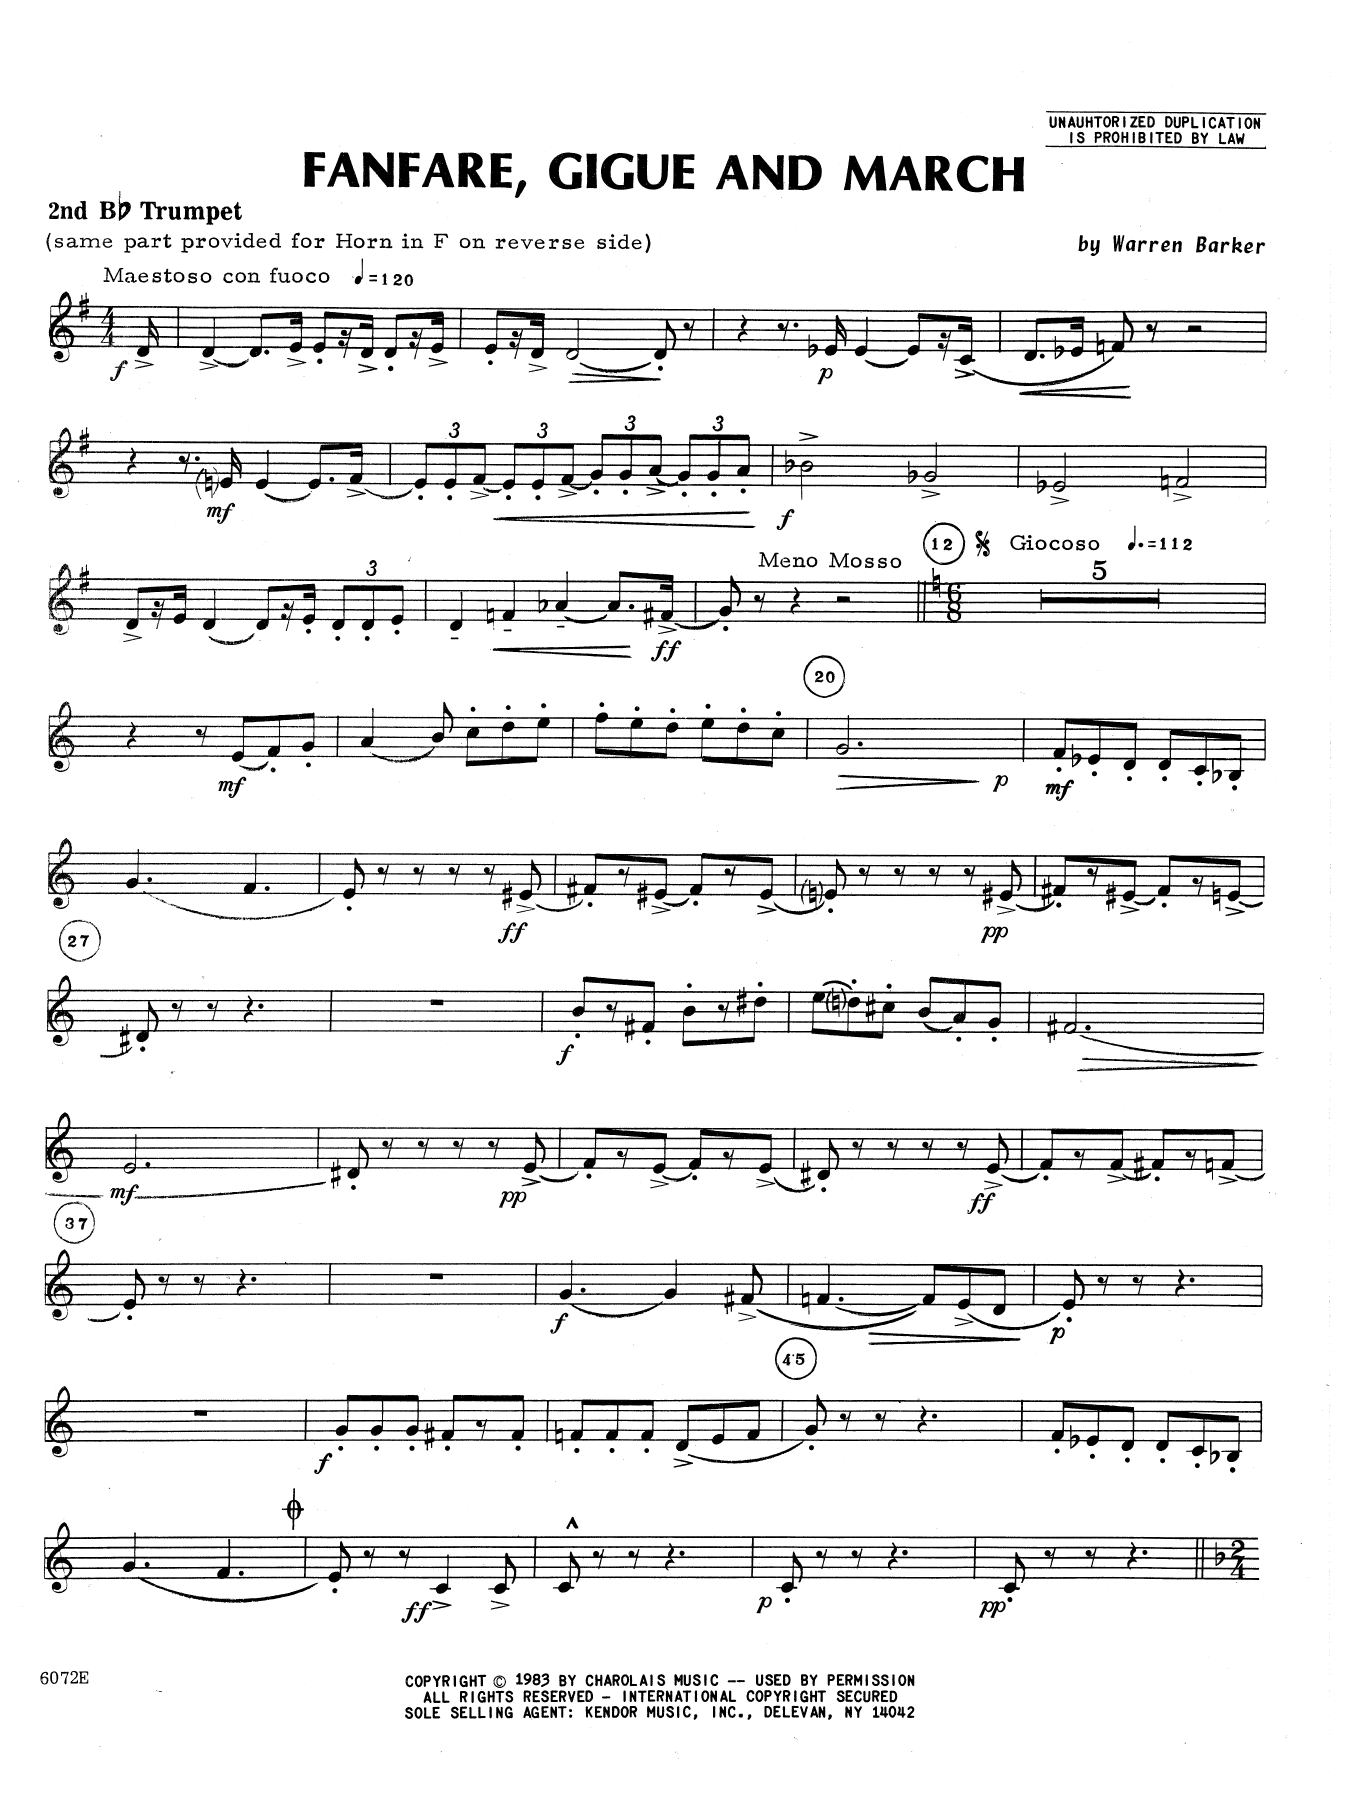 Download Barker Fanfare, Gigue And March - 2nd Bb Trump Sheet Music